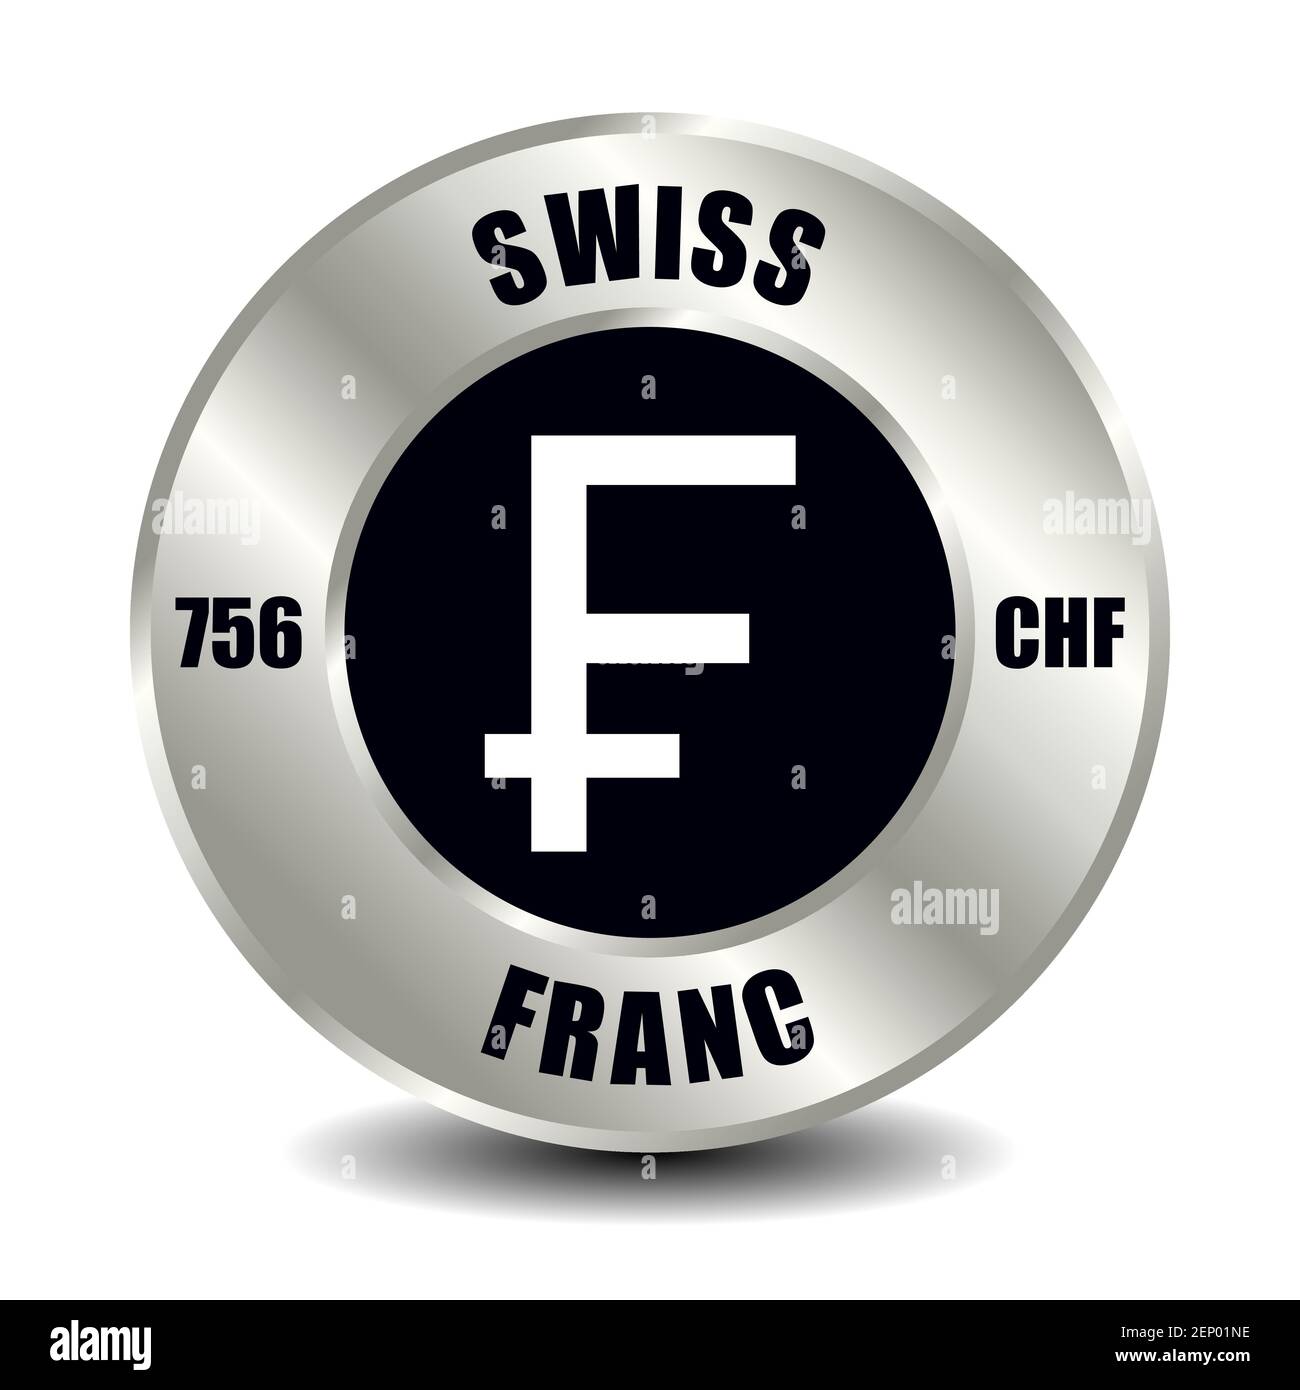 Switzerland money icon isolated on round silver coin. Vector sign of currency symbol with international ISO code and abbreviation Stock Vector